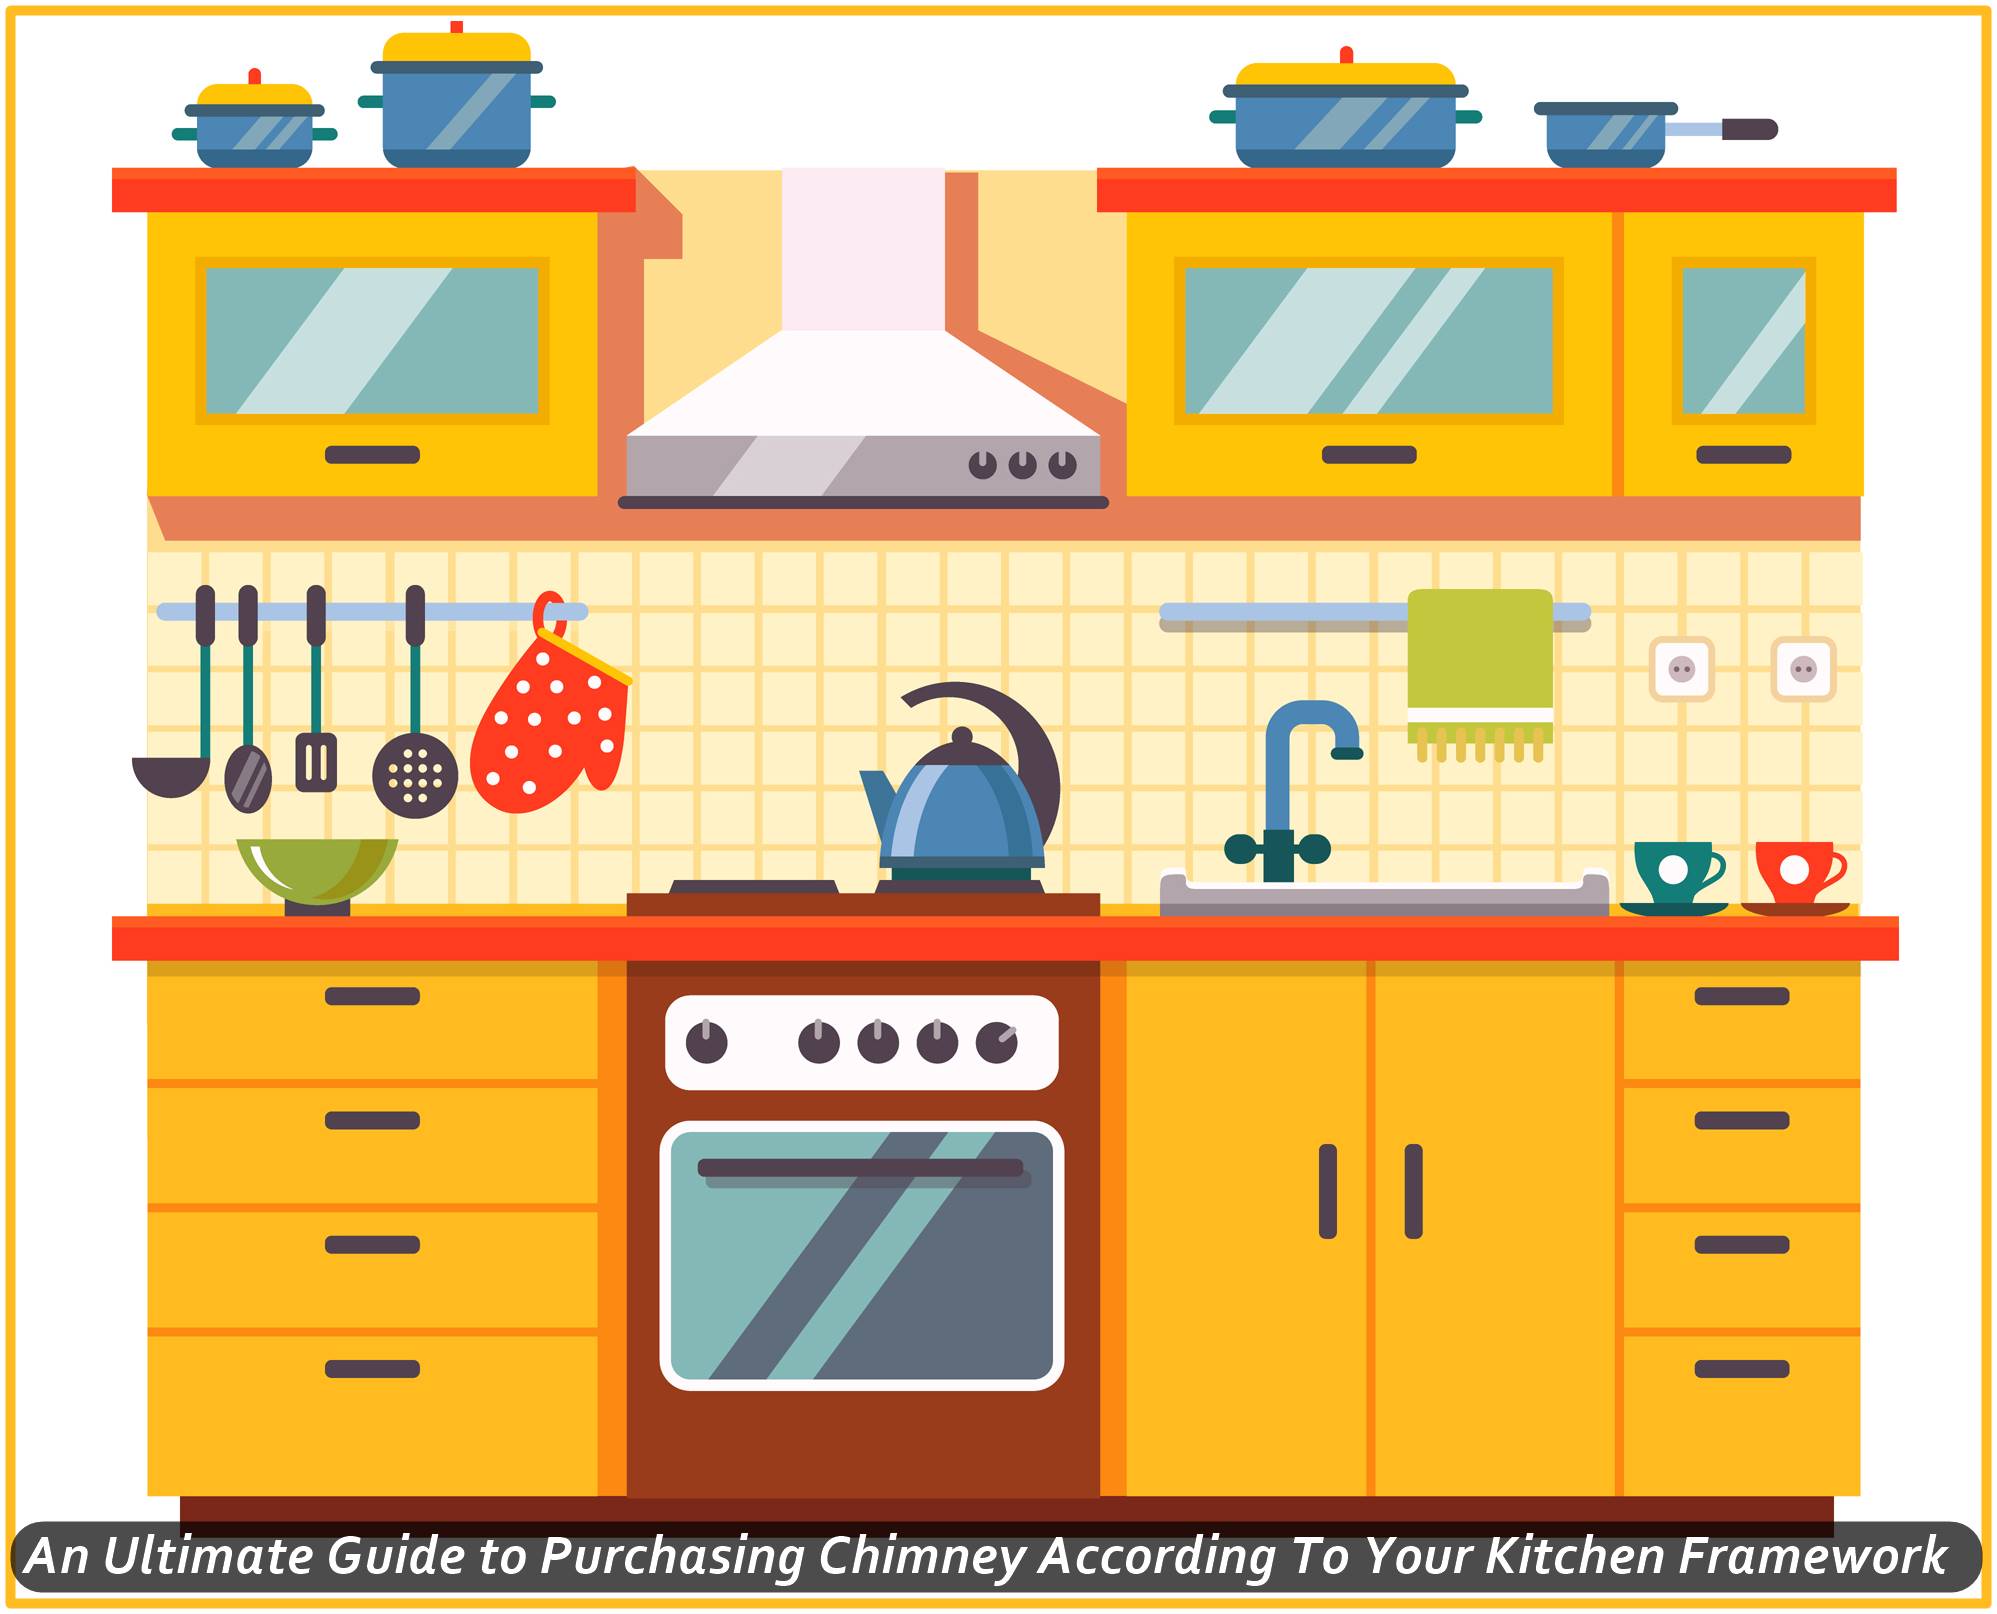 An Ultimate Guide to Purchasing Chimney According To Your Kitchen Framework